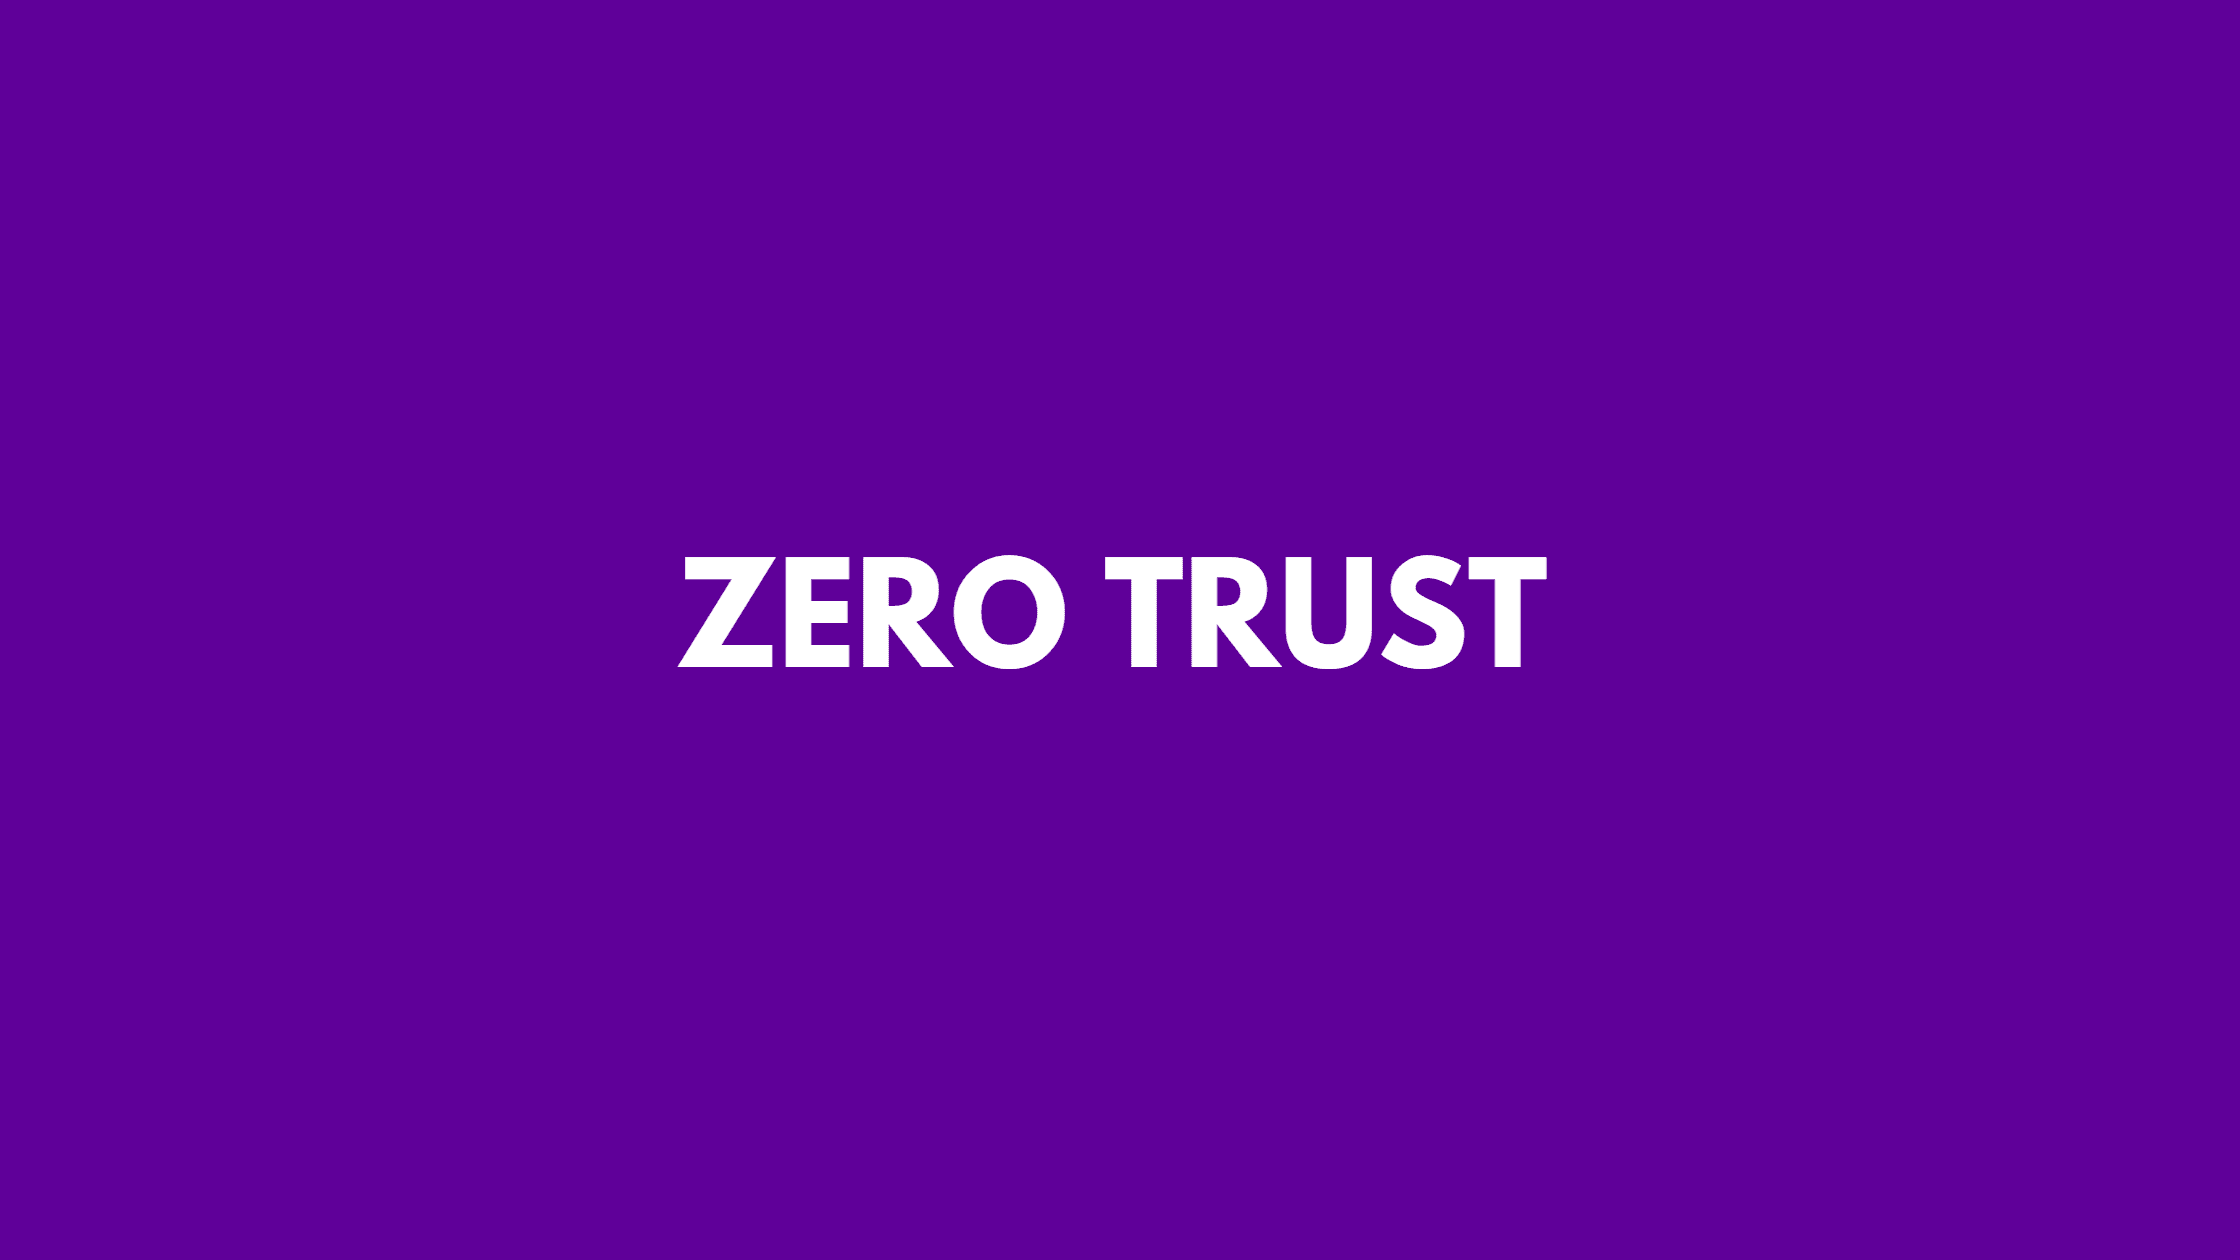 What Is Zero Trust Security And What Are The Benefits Of Zero Trust Architecture